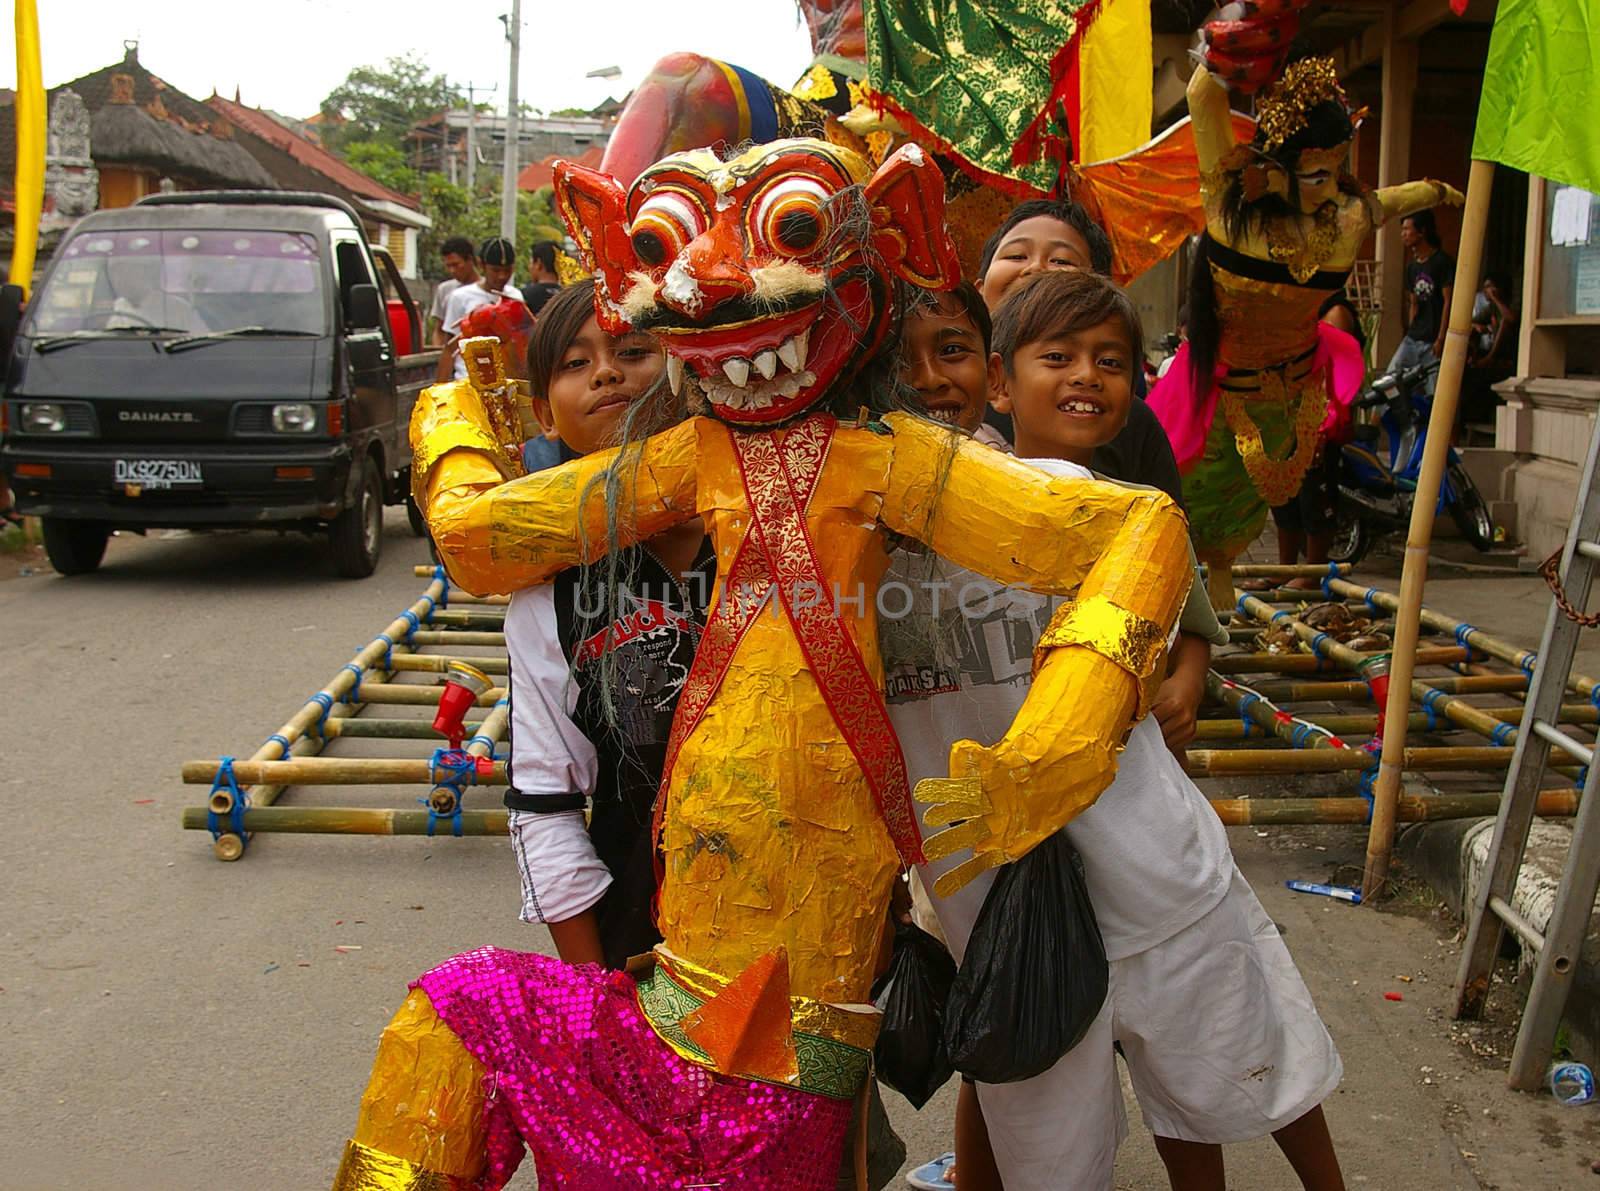 Boys with a monster statue for the Balinese Hindu festival of Pengrupukan. This celebrates the Balinese New Year and the arrival of spring. Nusa Dua, Bali, Indonesia